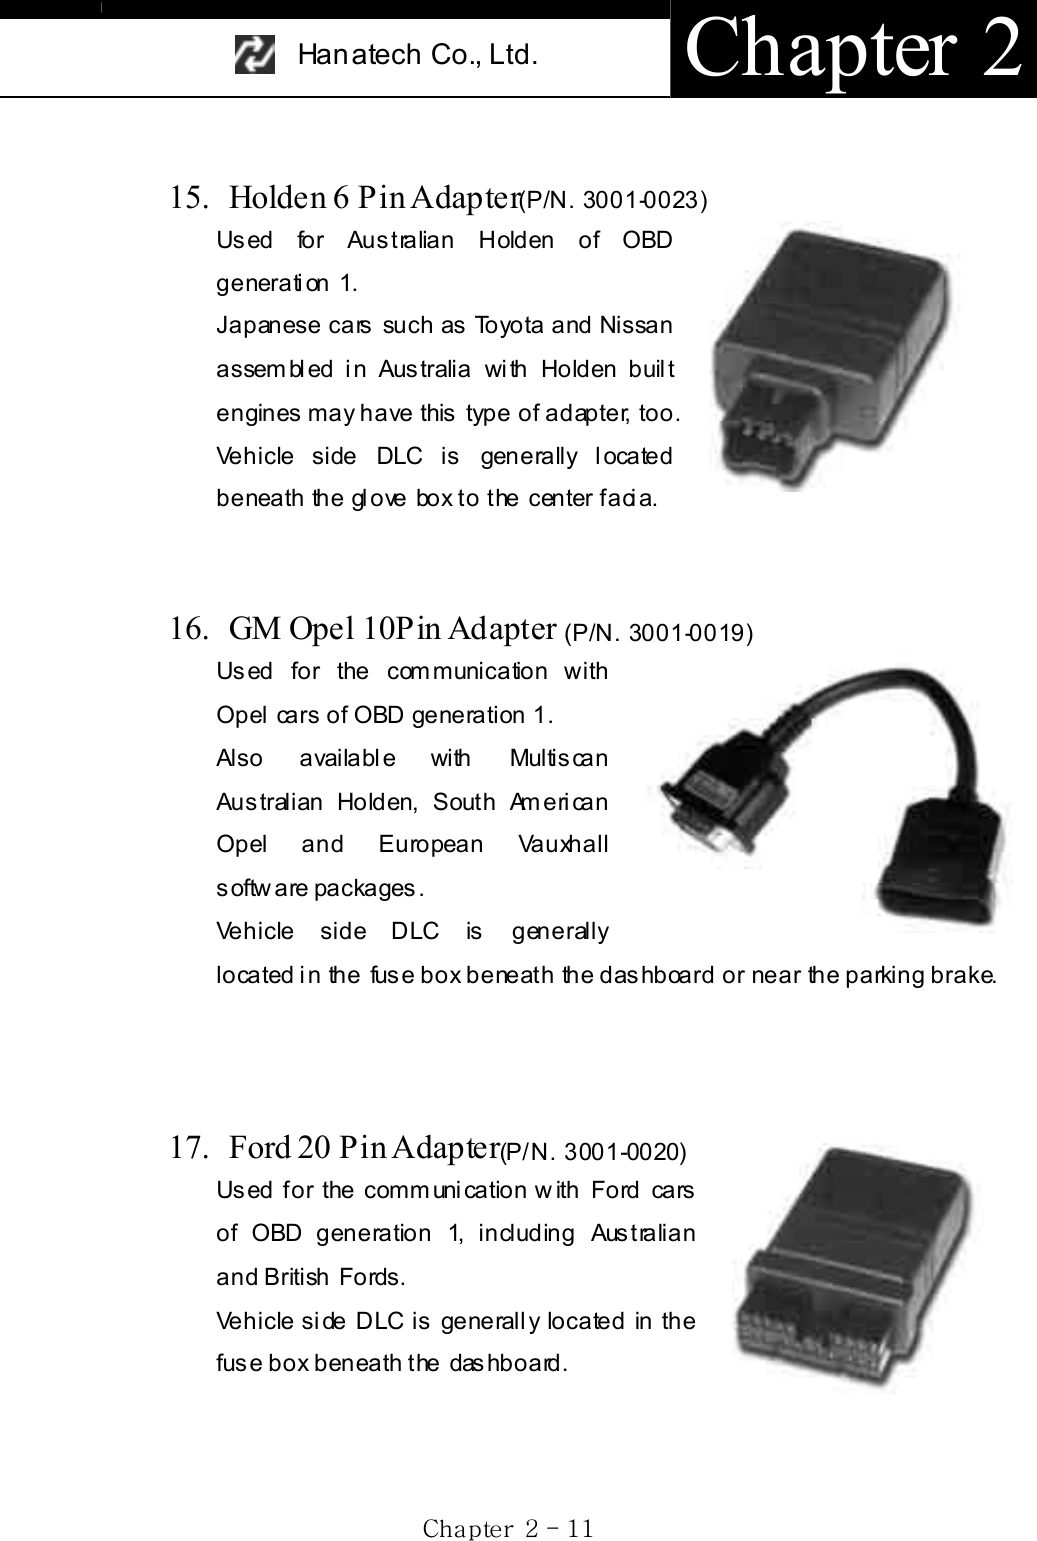 Han atech Co., Ltd.  Chapter 2 Gj  GYG TGXXG15.  Holden 6 Pin Adapter(P/N. 3001-0023)Used for Australian Holden of OBD generation 1. Japanese cars such as Toyota and Nissan assem bl ed i n Aus tralia wi th Holden buil t engines may have this type of adapter, too. Vehicle side DLC is generally located beneath the glove box to the center facia. 16.  GM Opel 10Pin Adapter (P/N. 3001-0019)Used for the com munication with Opel cars  of OBD generation 1. Also available with Multiscan Australian Holden, South American Opel and European Vauxhall s oftw are packages .   Vehicle side DLC is generally located in the  fuse box  beneath the dashboard or near  the parking brake. 17. Ford 20 Pin Adapter(P/N. 3001-0020)Used for the communication with Ford cars of OBD generation 1, including Australian and British Fords.Vehicle side DLC is generally located in the fuse box beneath the  dashboard.